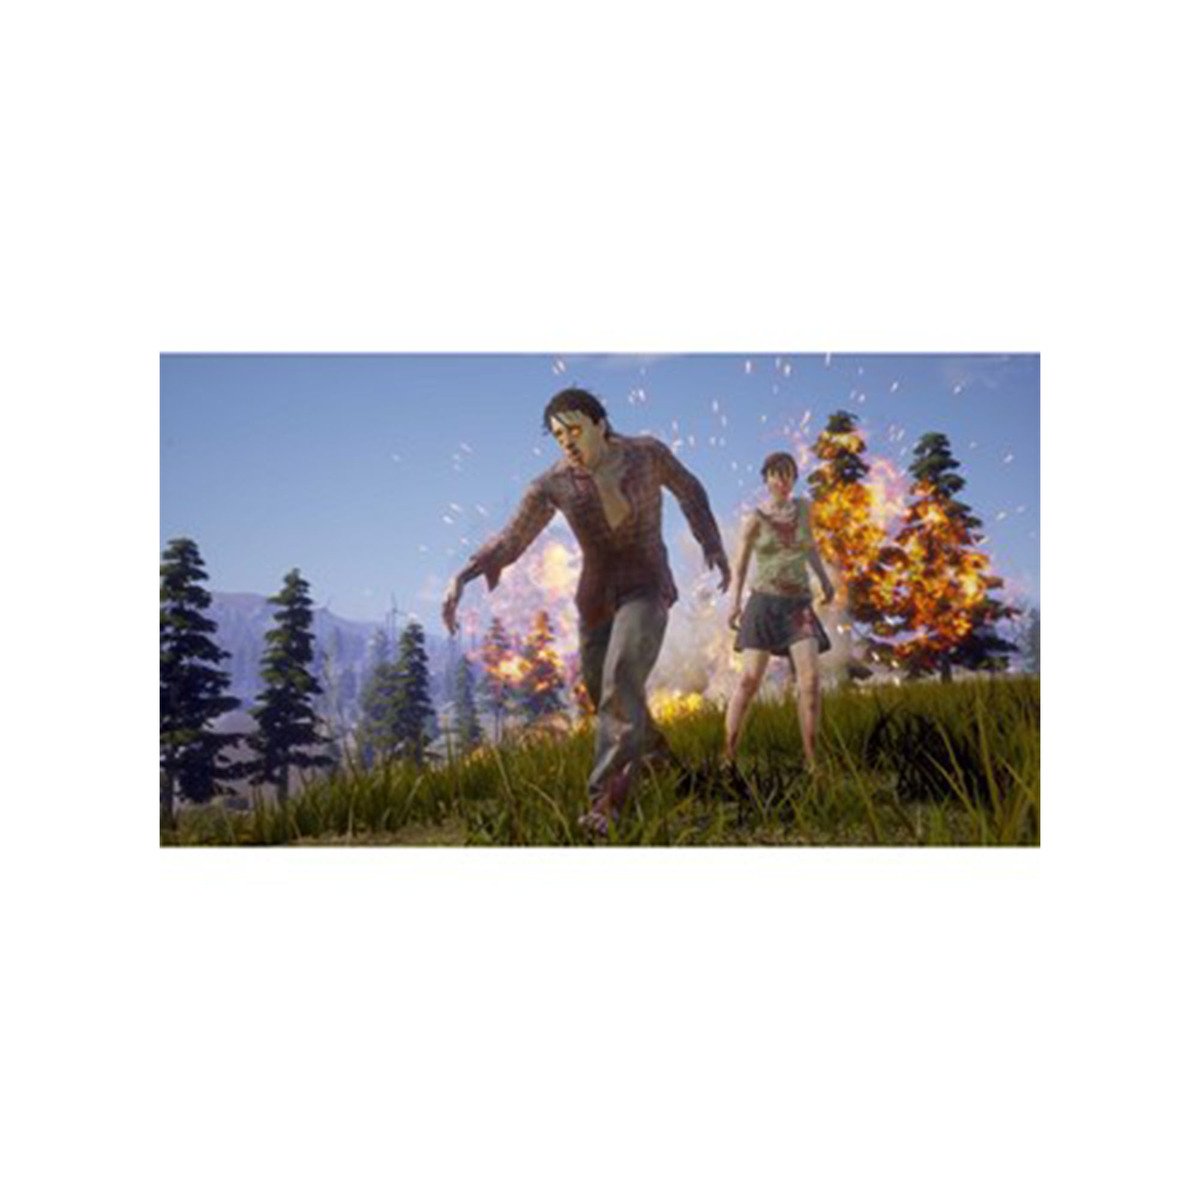 Xbox One State Of Decay 2